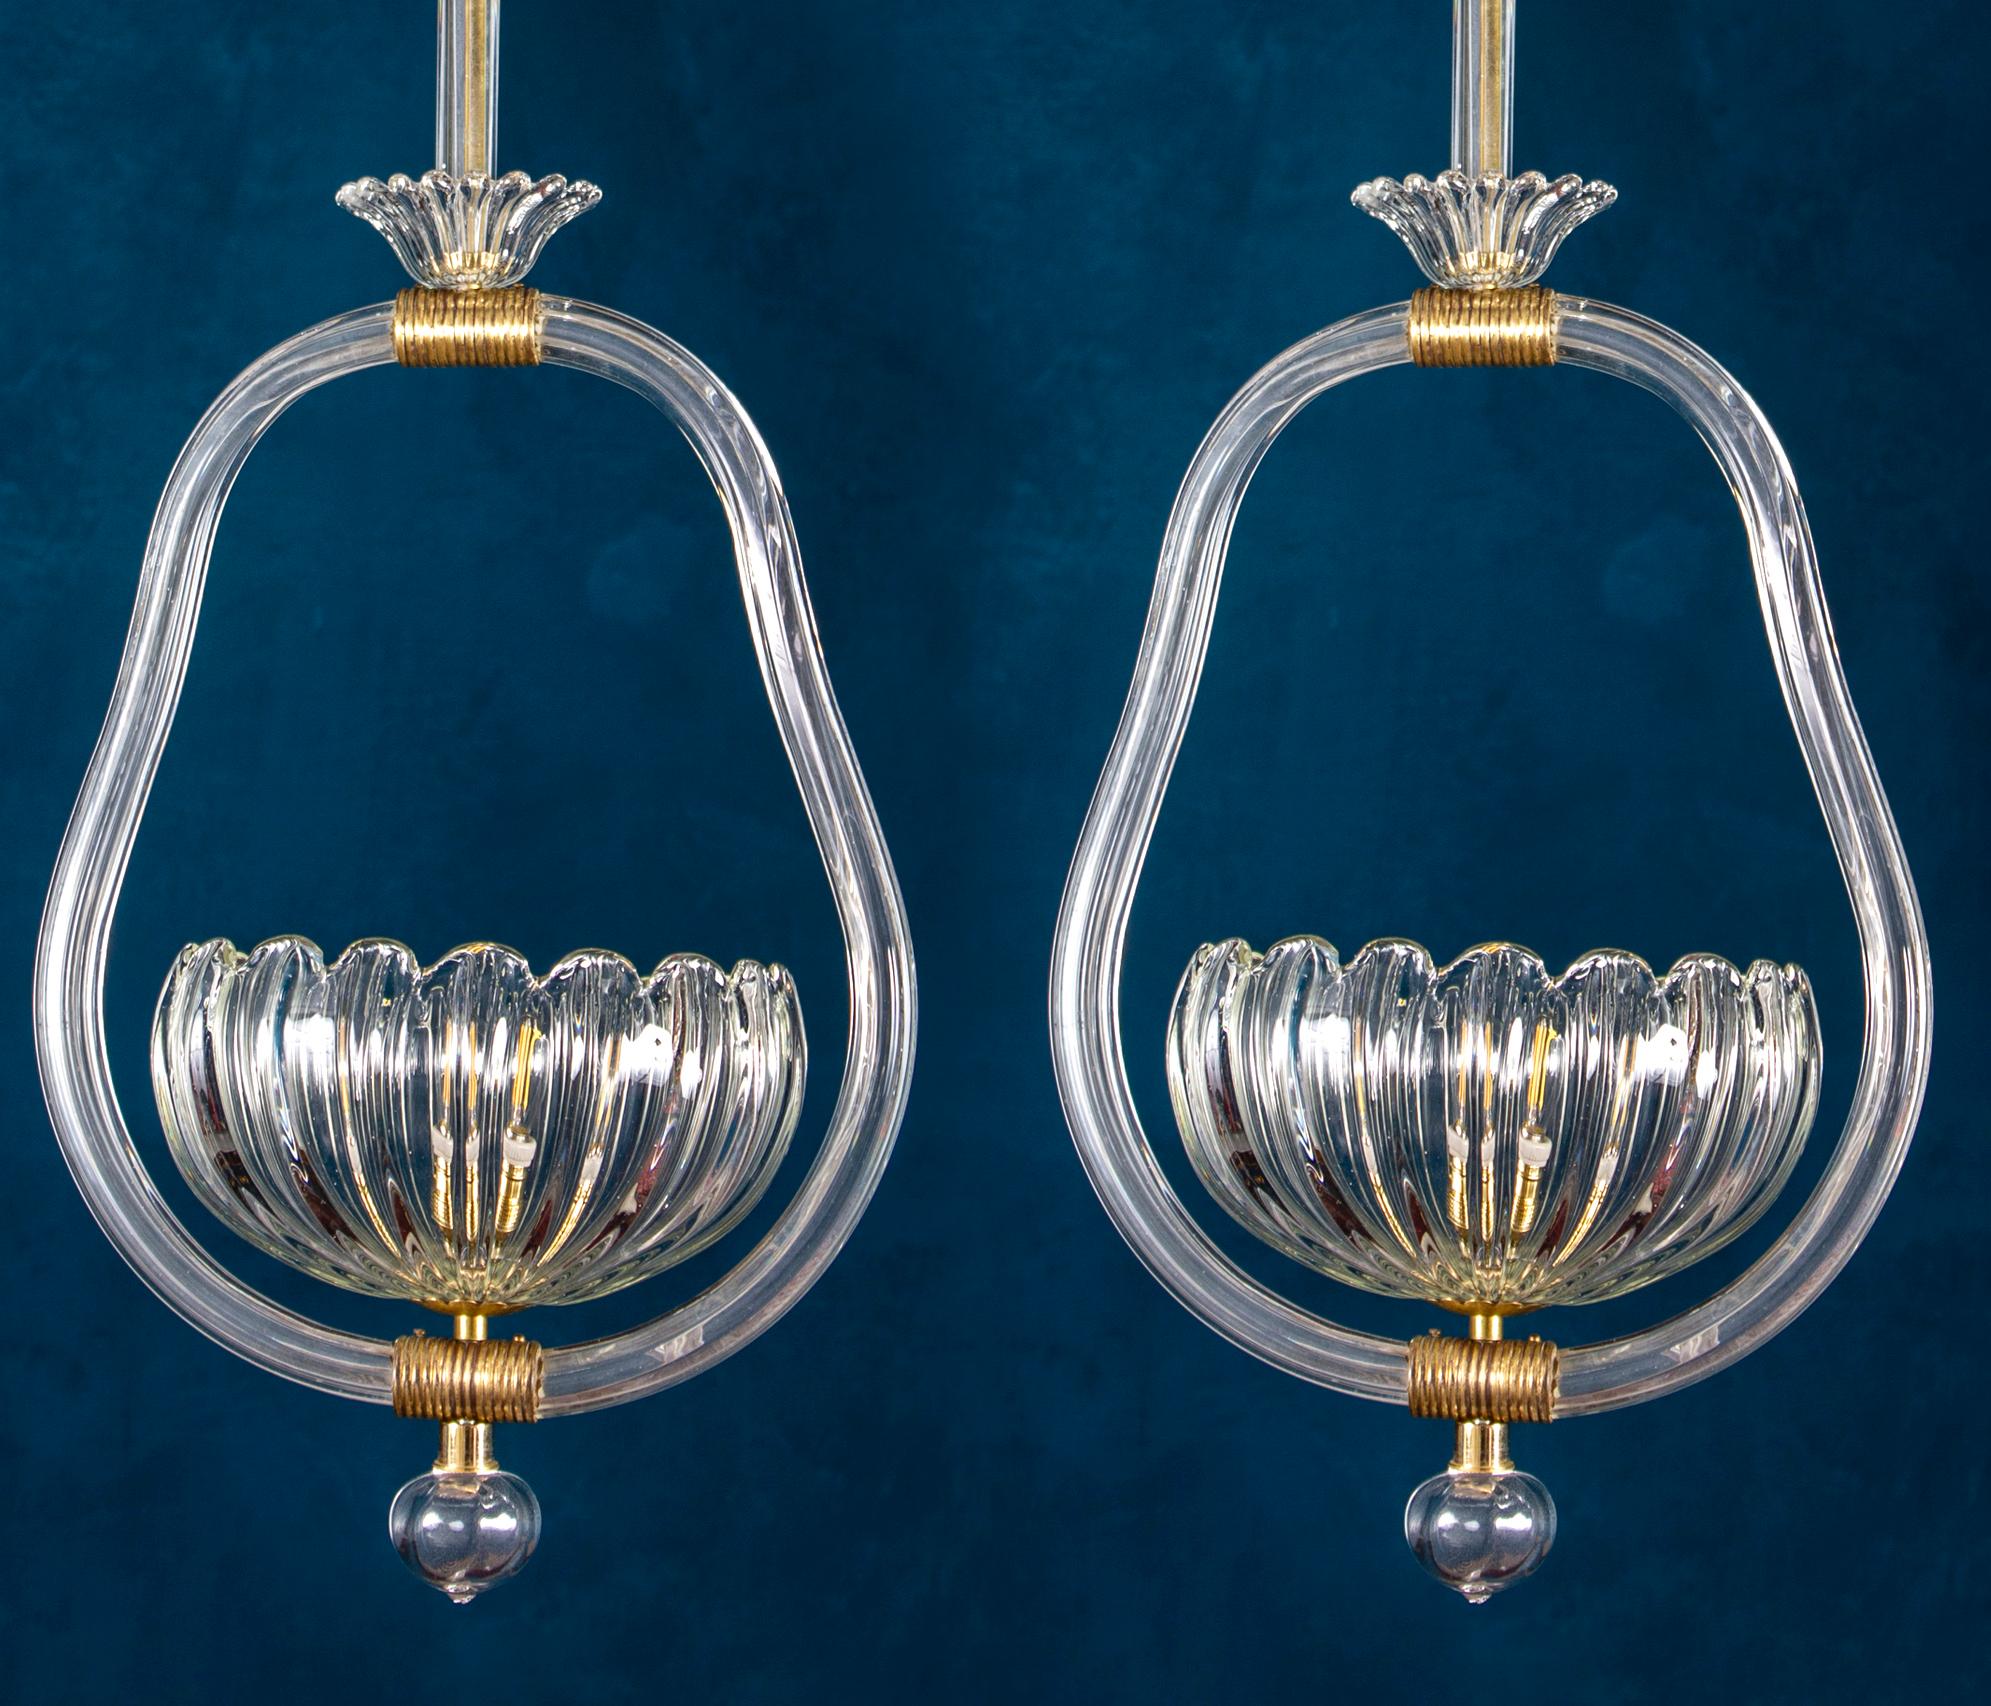 A beautiful pair of Italian Art Deco chandeliers by Ercole Barovier, made of clear Murano glass and brass.
Each with one E 27 light bulbs.
We can rewire for your country standards.
They are in excellent vintage condition, the brass with warm